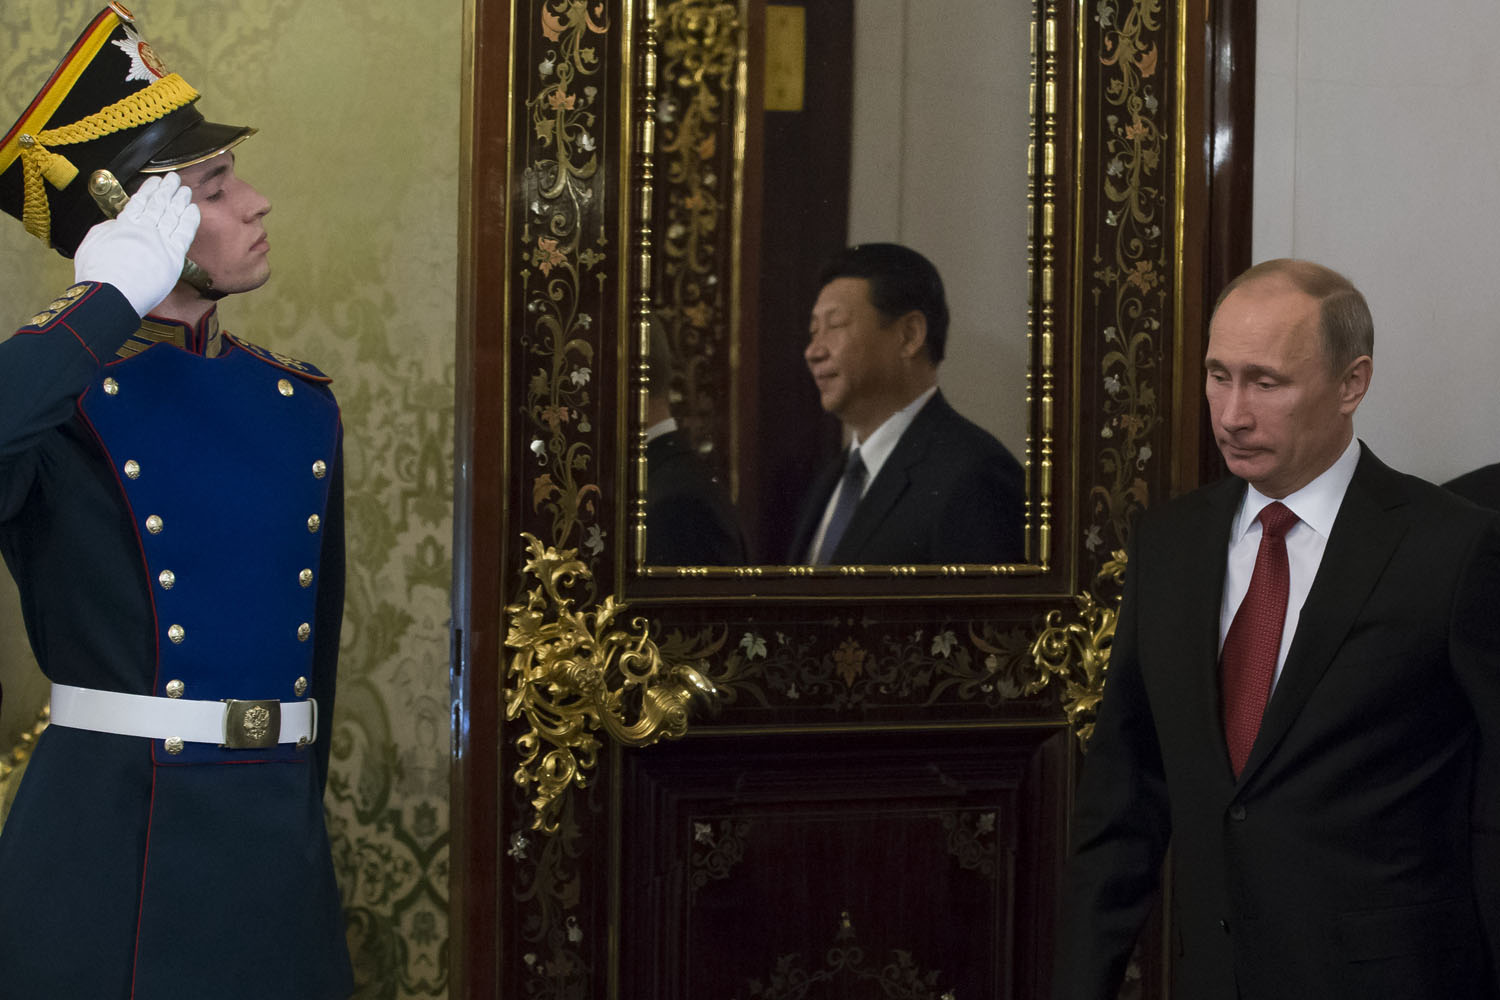 March 22, 2013. Russia's President Vladimir Putin (L) followed by  his Chinese counterpart Xi Jinping (reflected in the mirror) enters a hall before their talks in the Grand Kremlin Palace in Moscow. Xi Jinping arrived today in Moscow on his first foreign trip, to cement ties between the two countries by inking a raft of energy and investment accords.